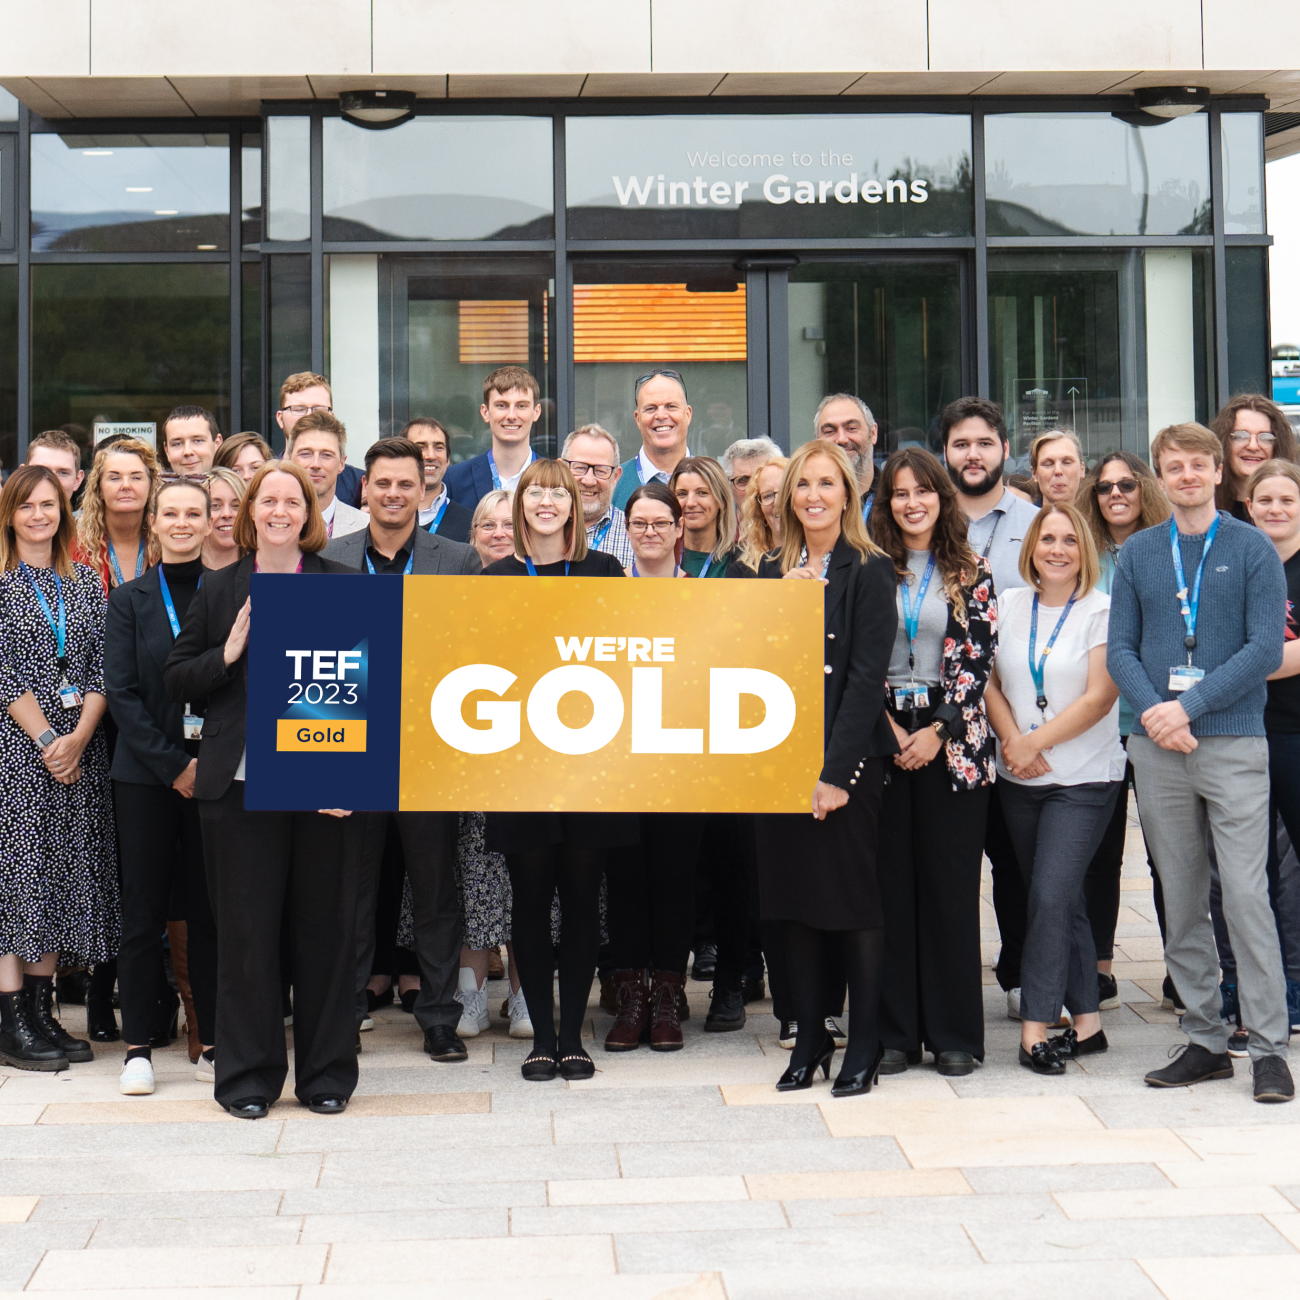 UCW staff holding a TEF Gold banner outside the Winter Gardens